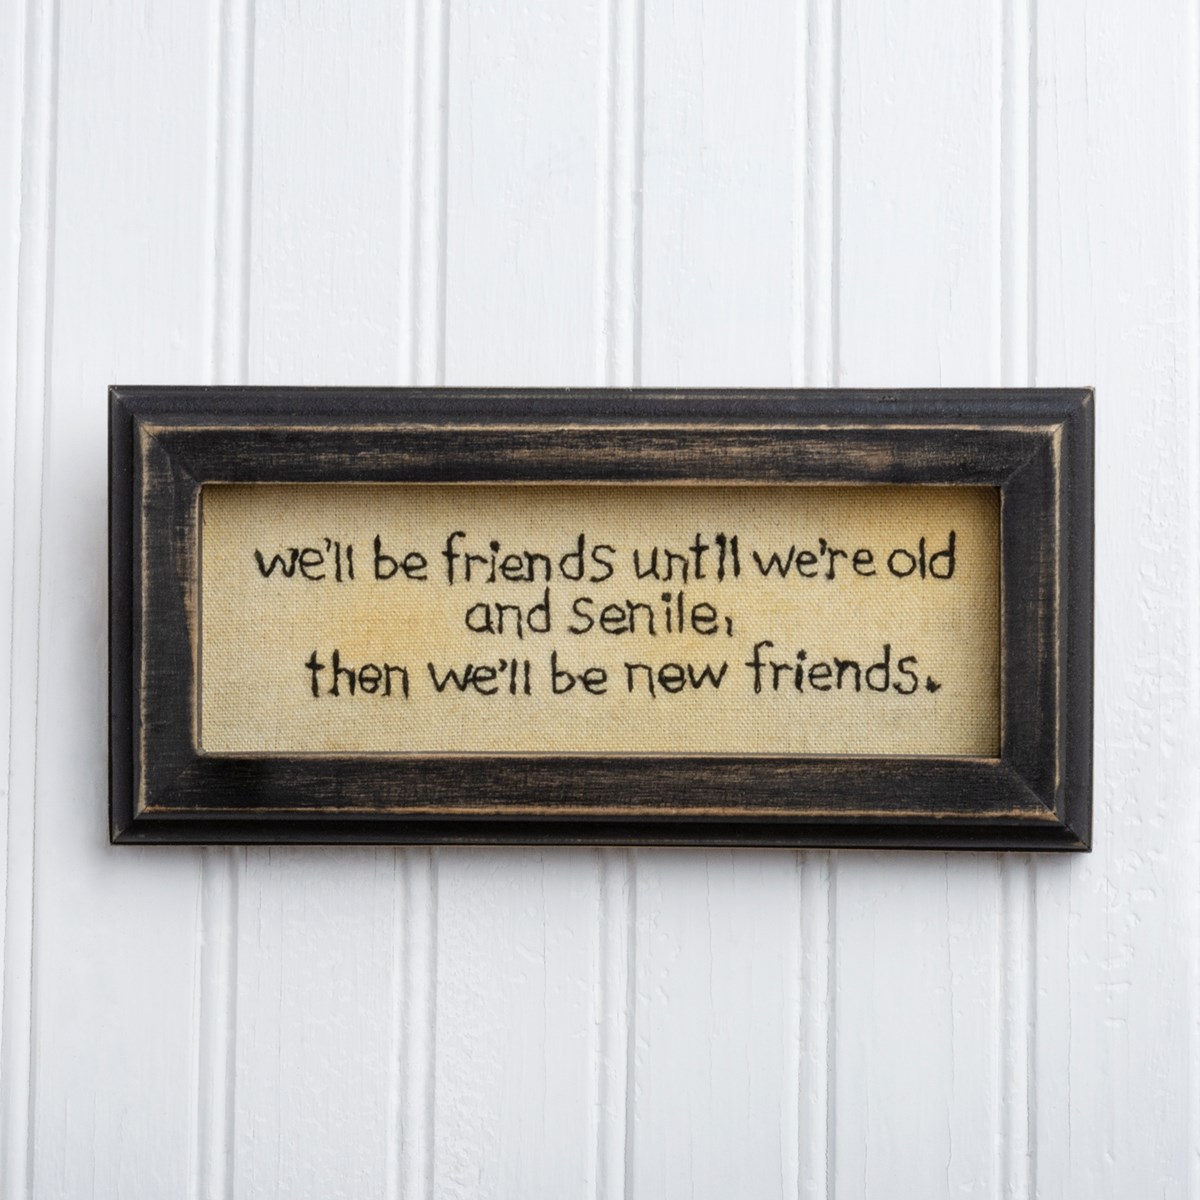 Stitchery - Until We're Old And Senile - 8" x 3.75" x 0.75" - Cotton, Wood, Glass